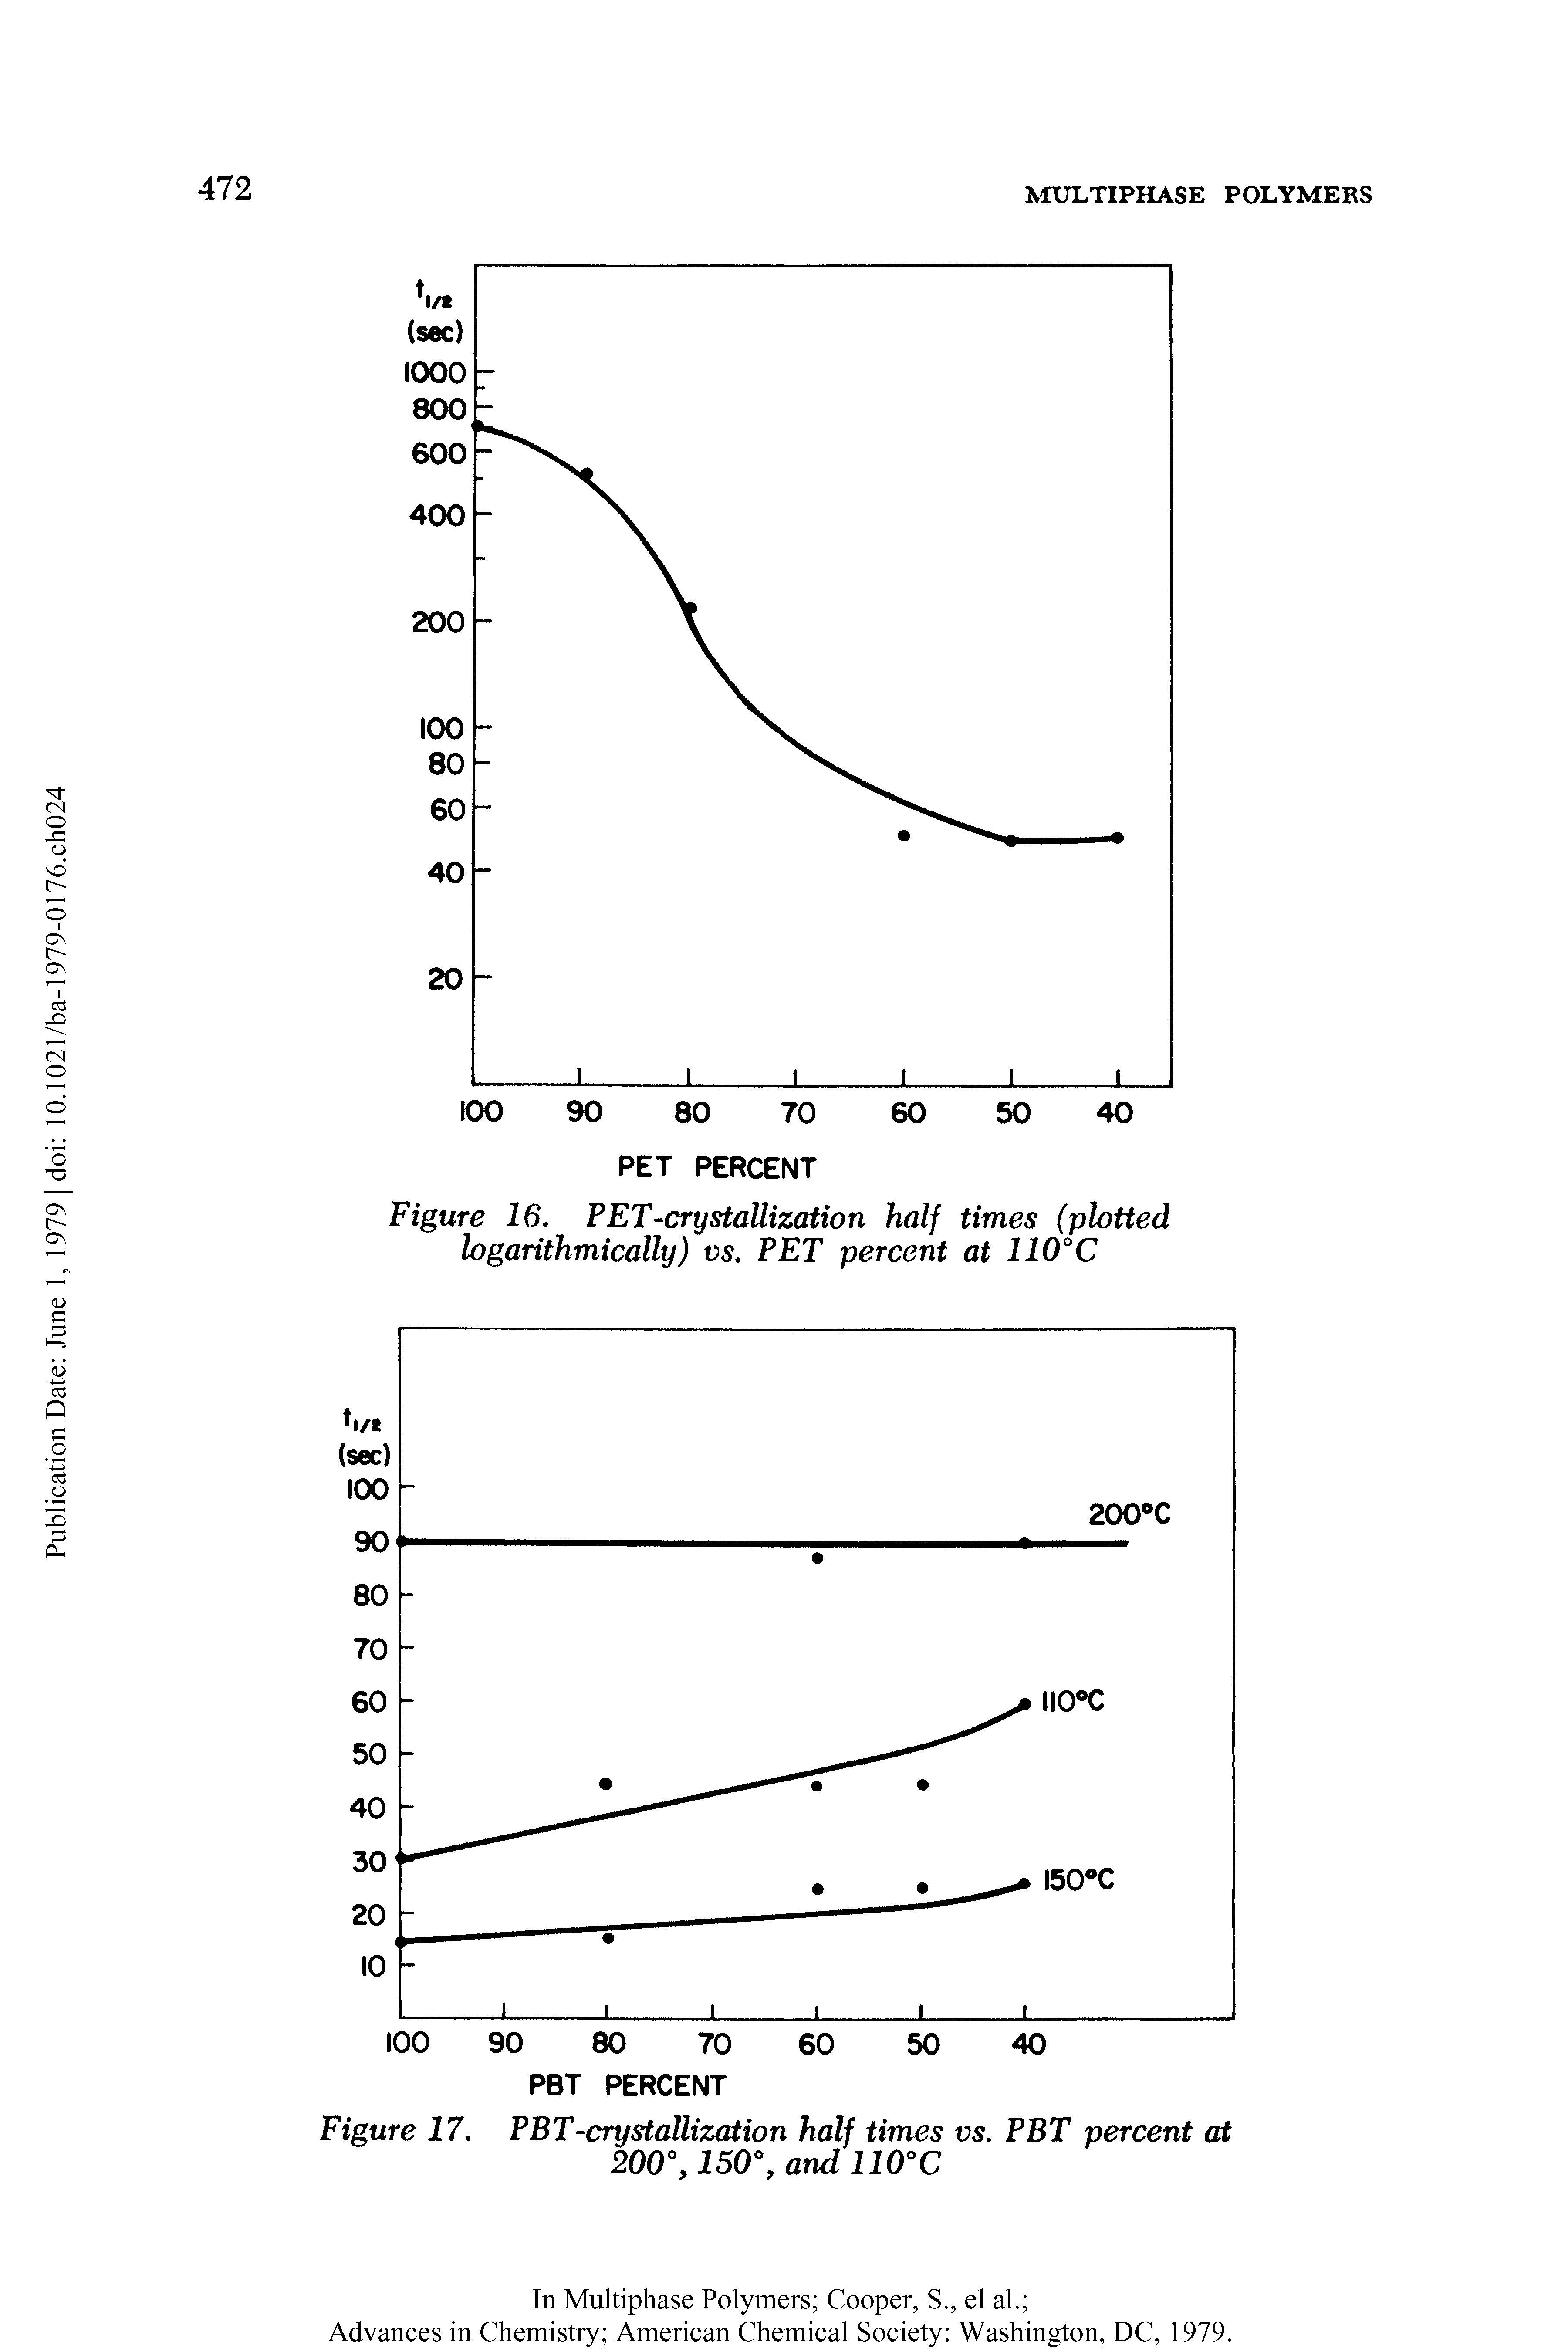 Figure 16. PET-crystallization half times (plotted logarithmically) vs. PET percent at 110°C...